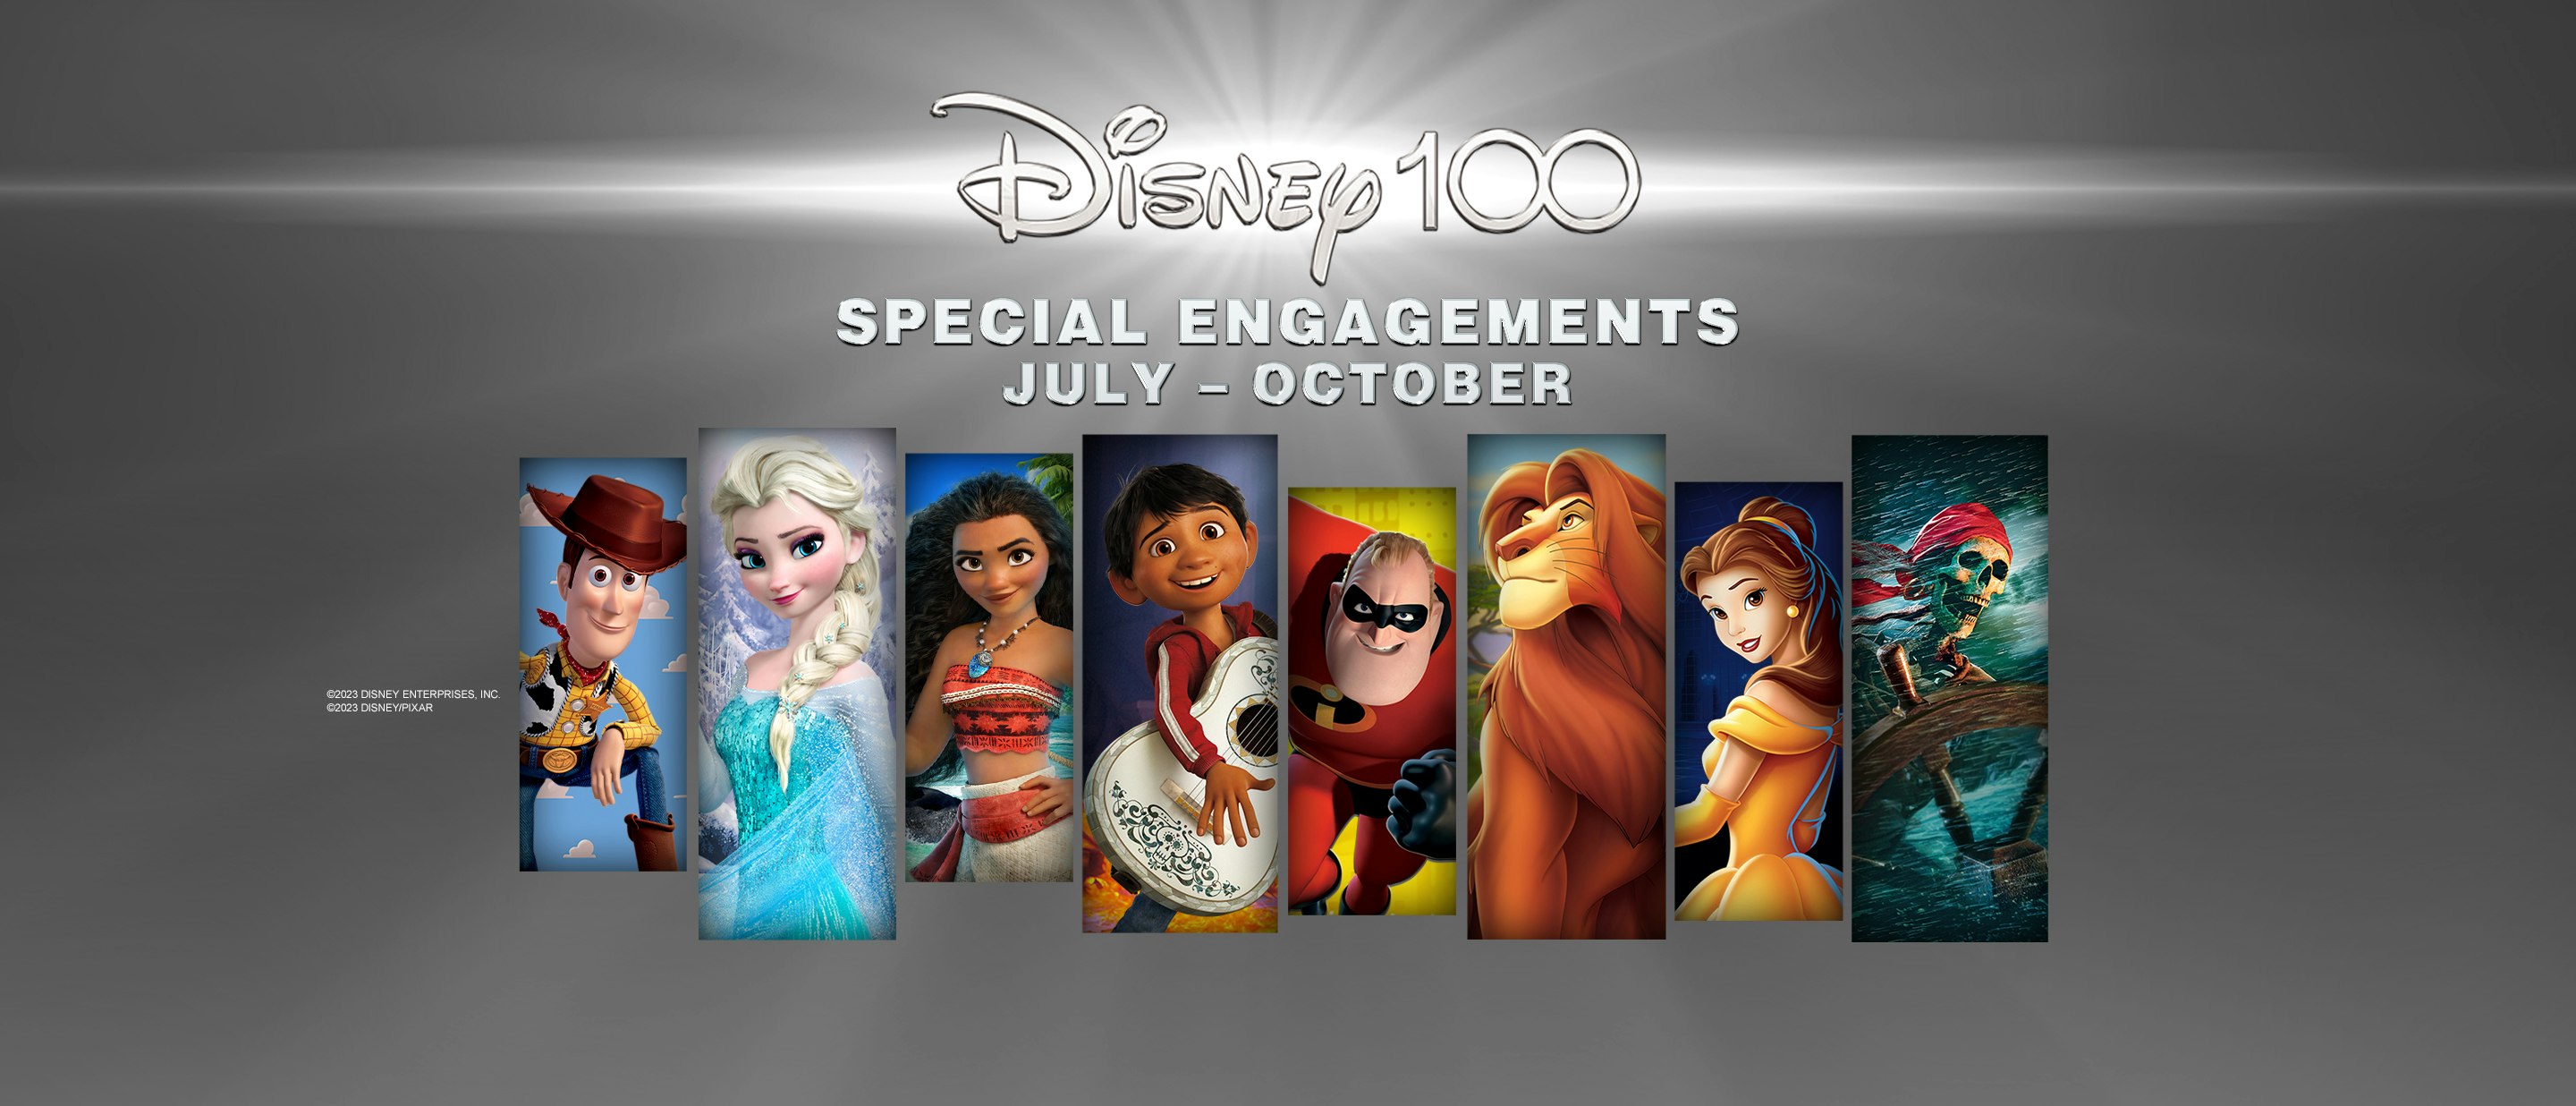 Disney 100 Special Engagements